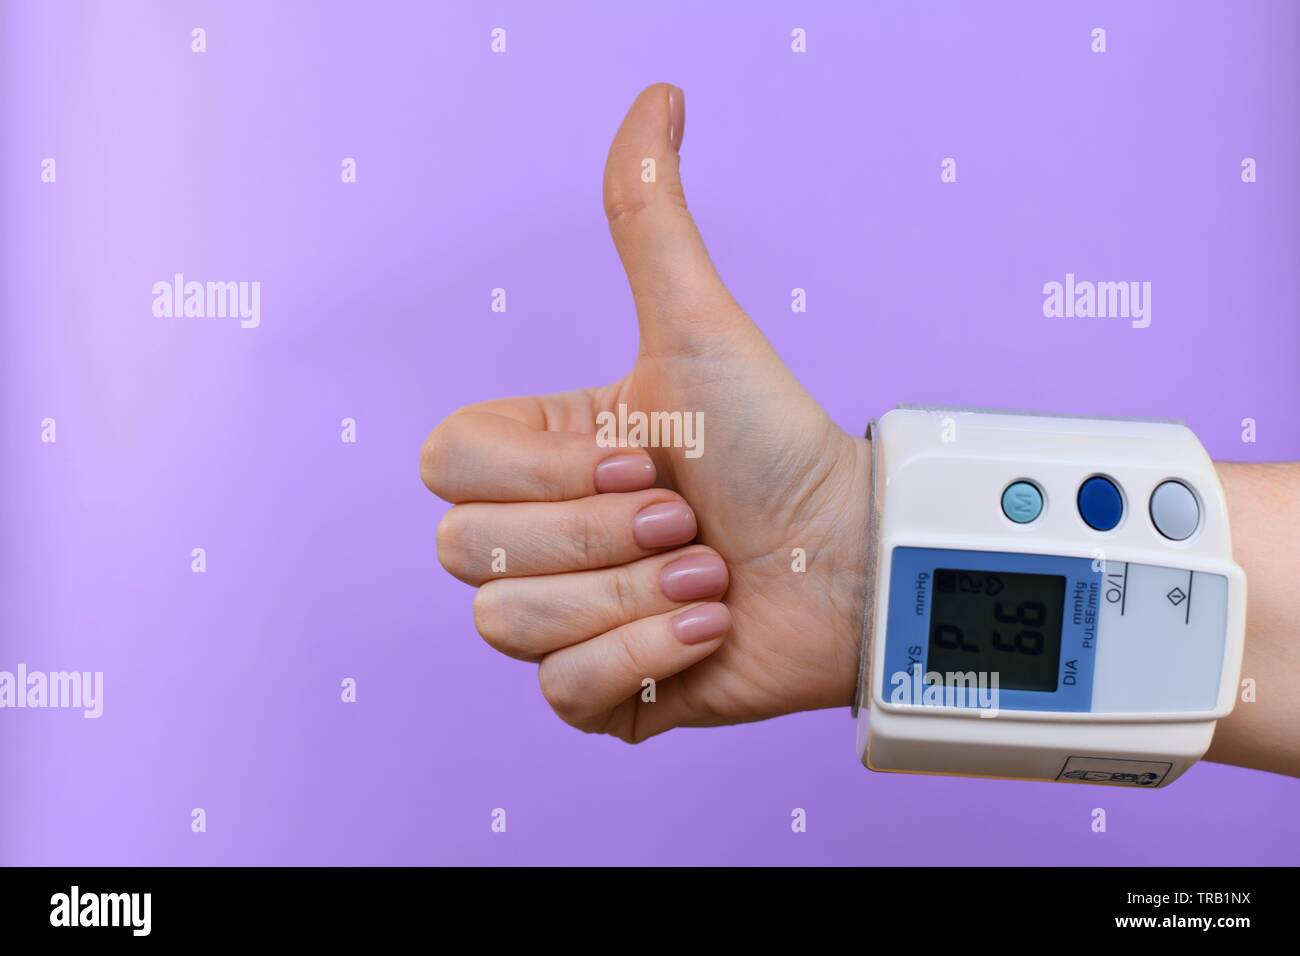 Arm and blood pressure monitor, buttoned at the wrist. In the center, from the bottom right corner. On a purple background. On the scoreboard heart ra Stock Photo